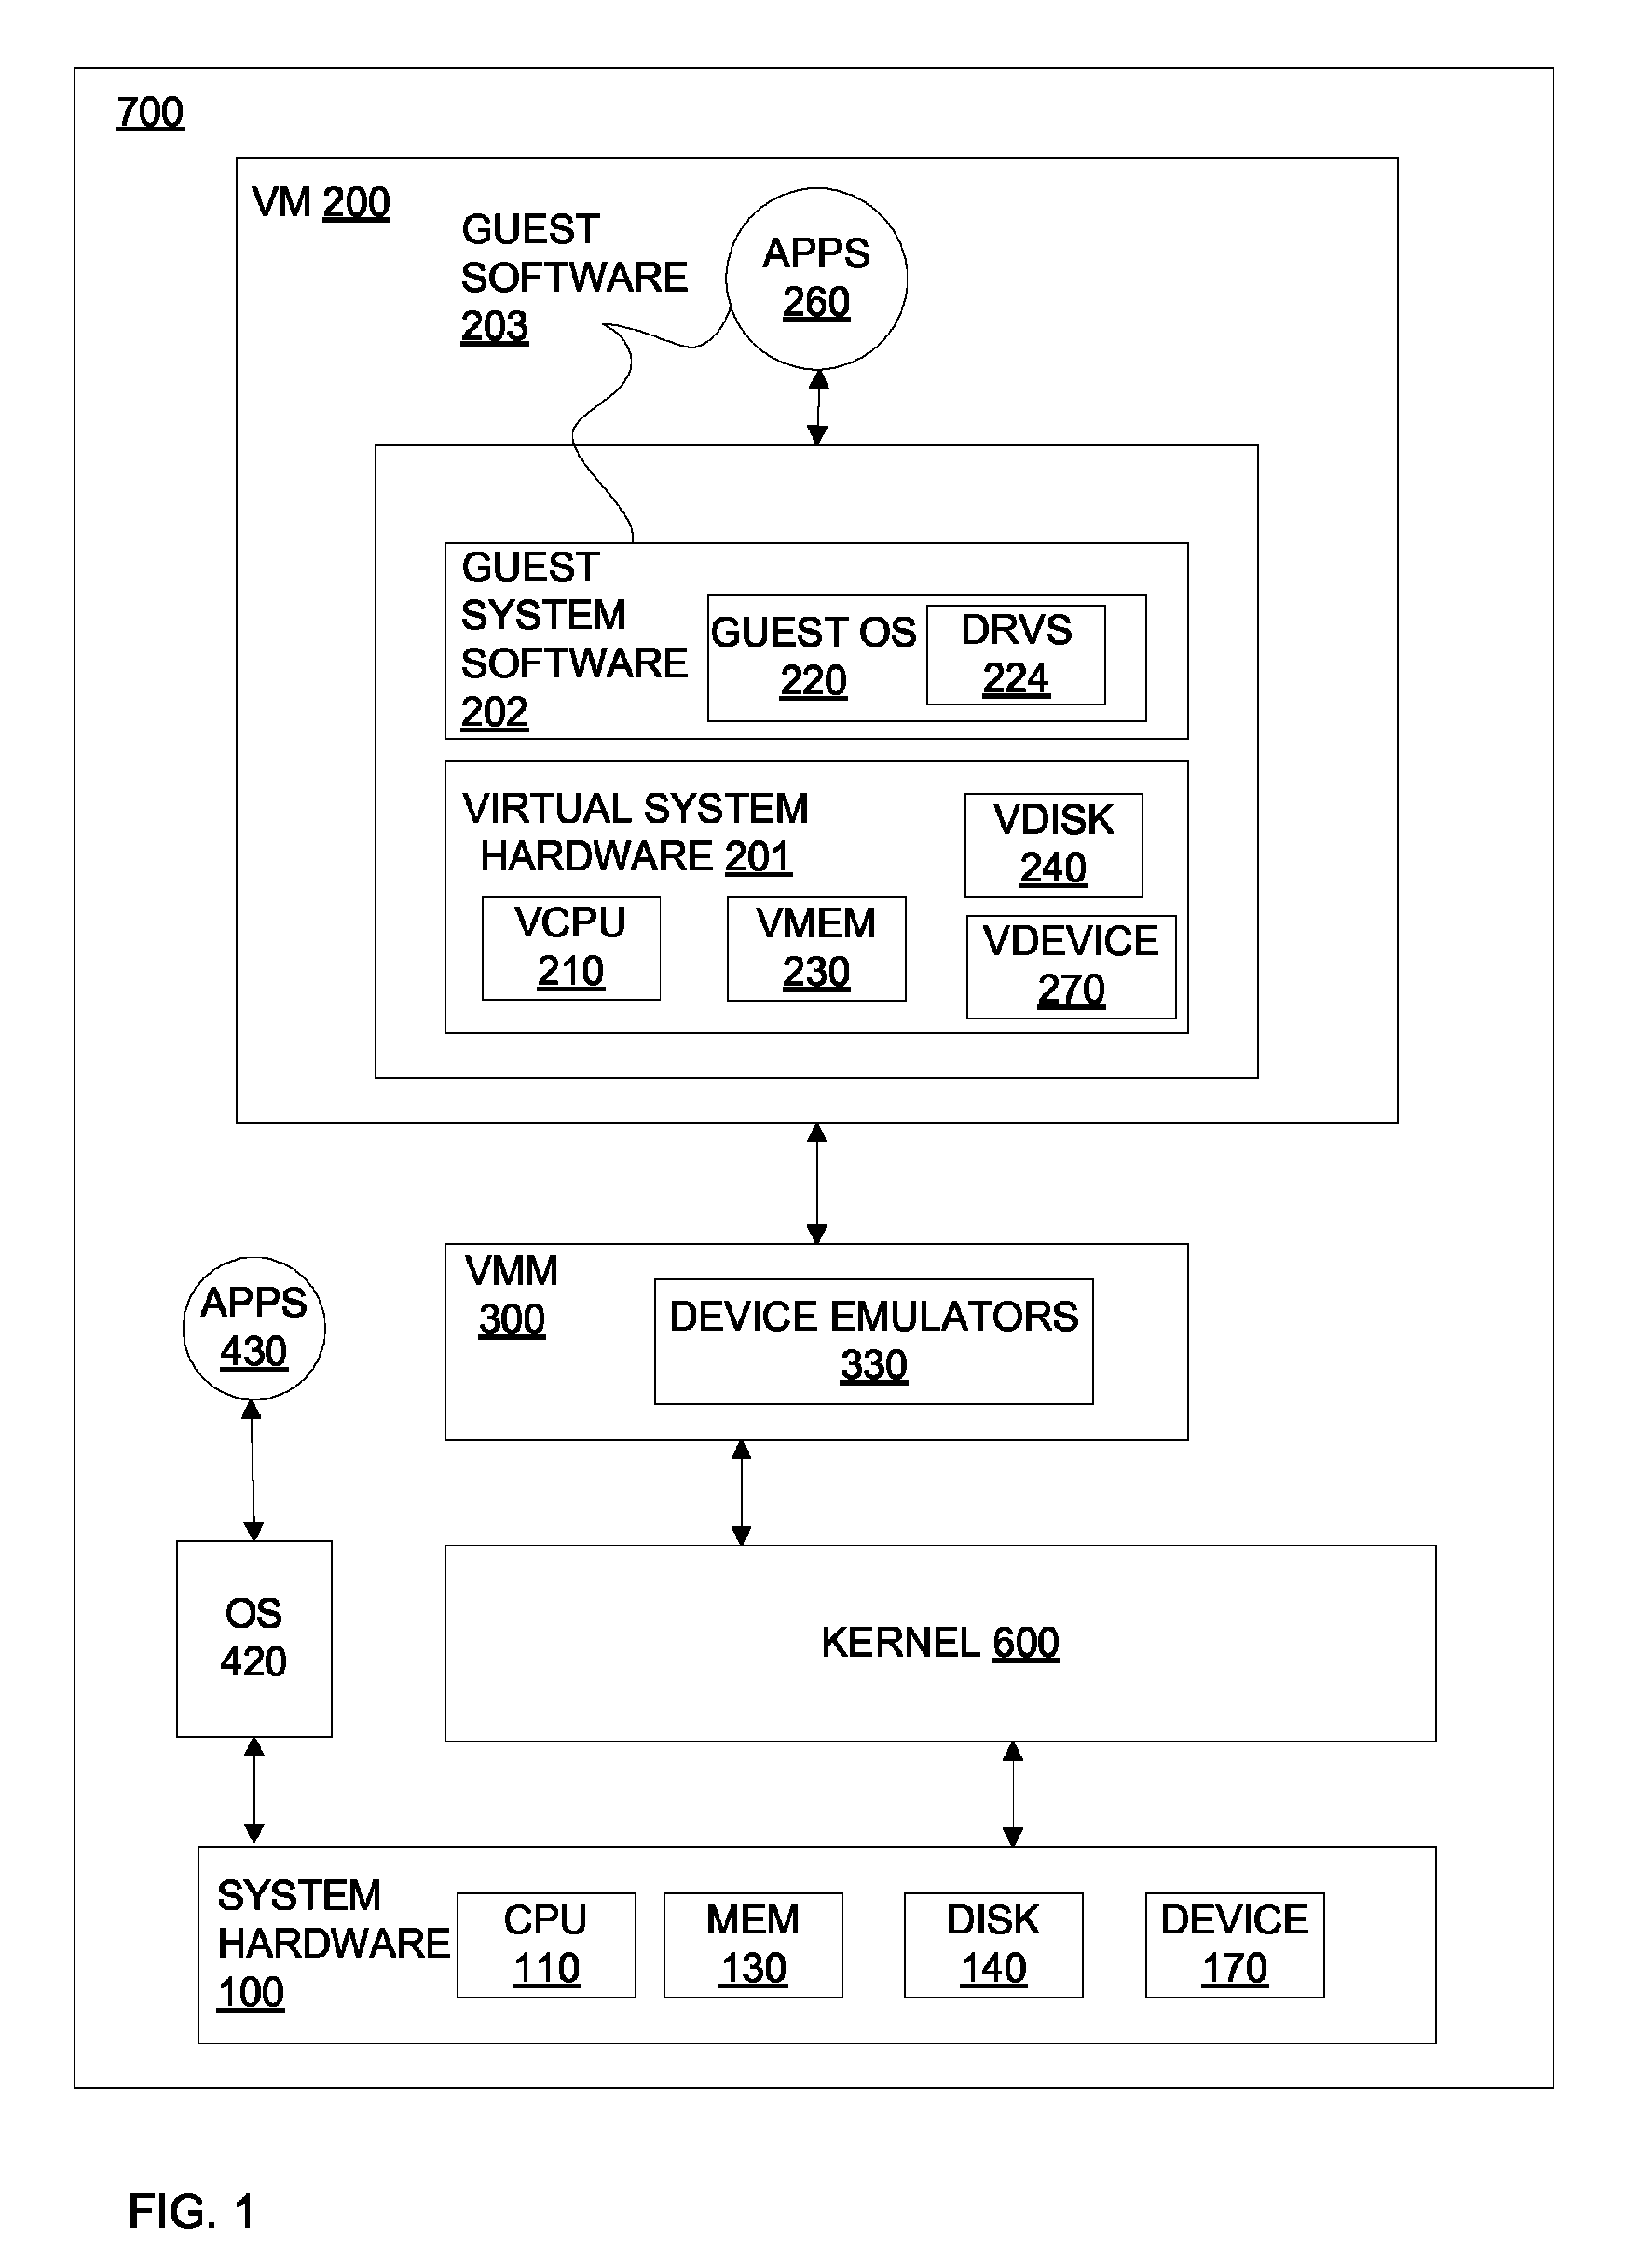 Method for tracking changes in virtual disks